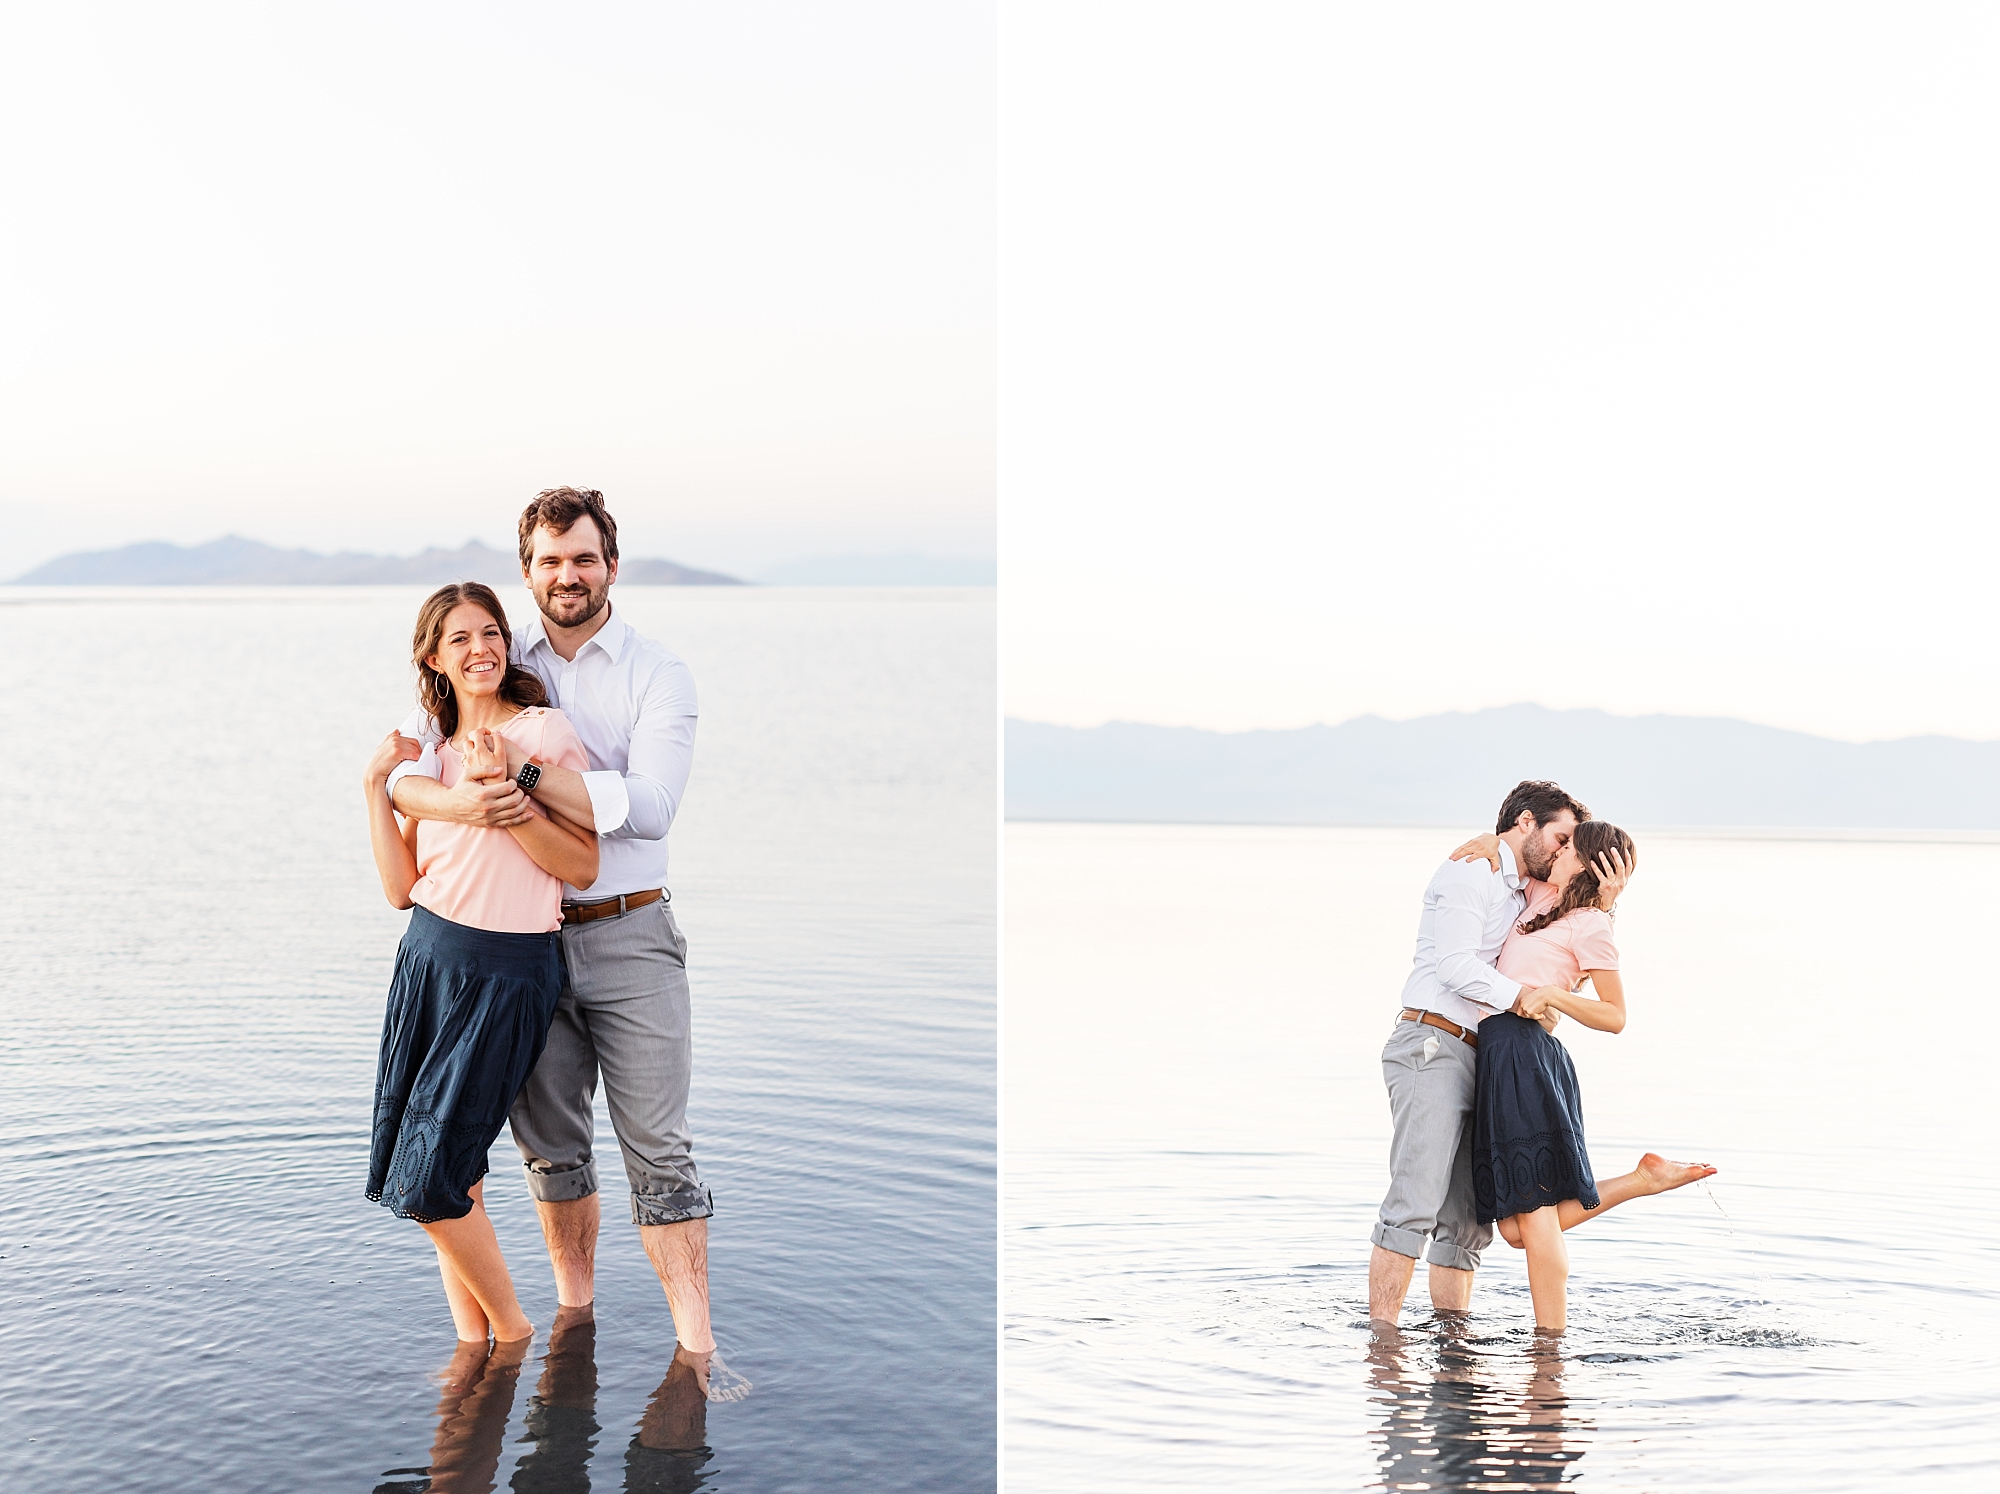 Summer Sunset at the Great Saltair Engagement Session